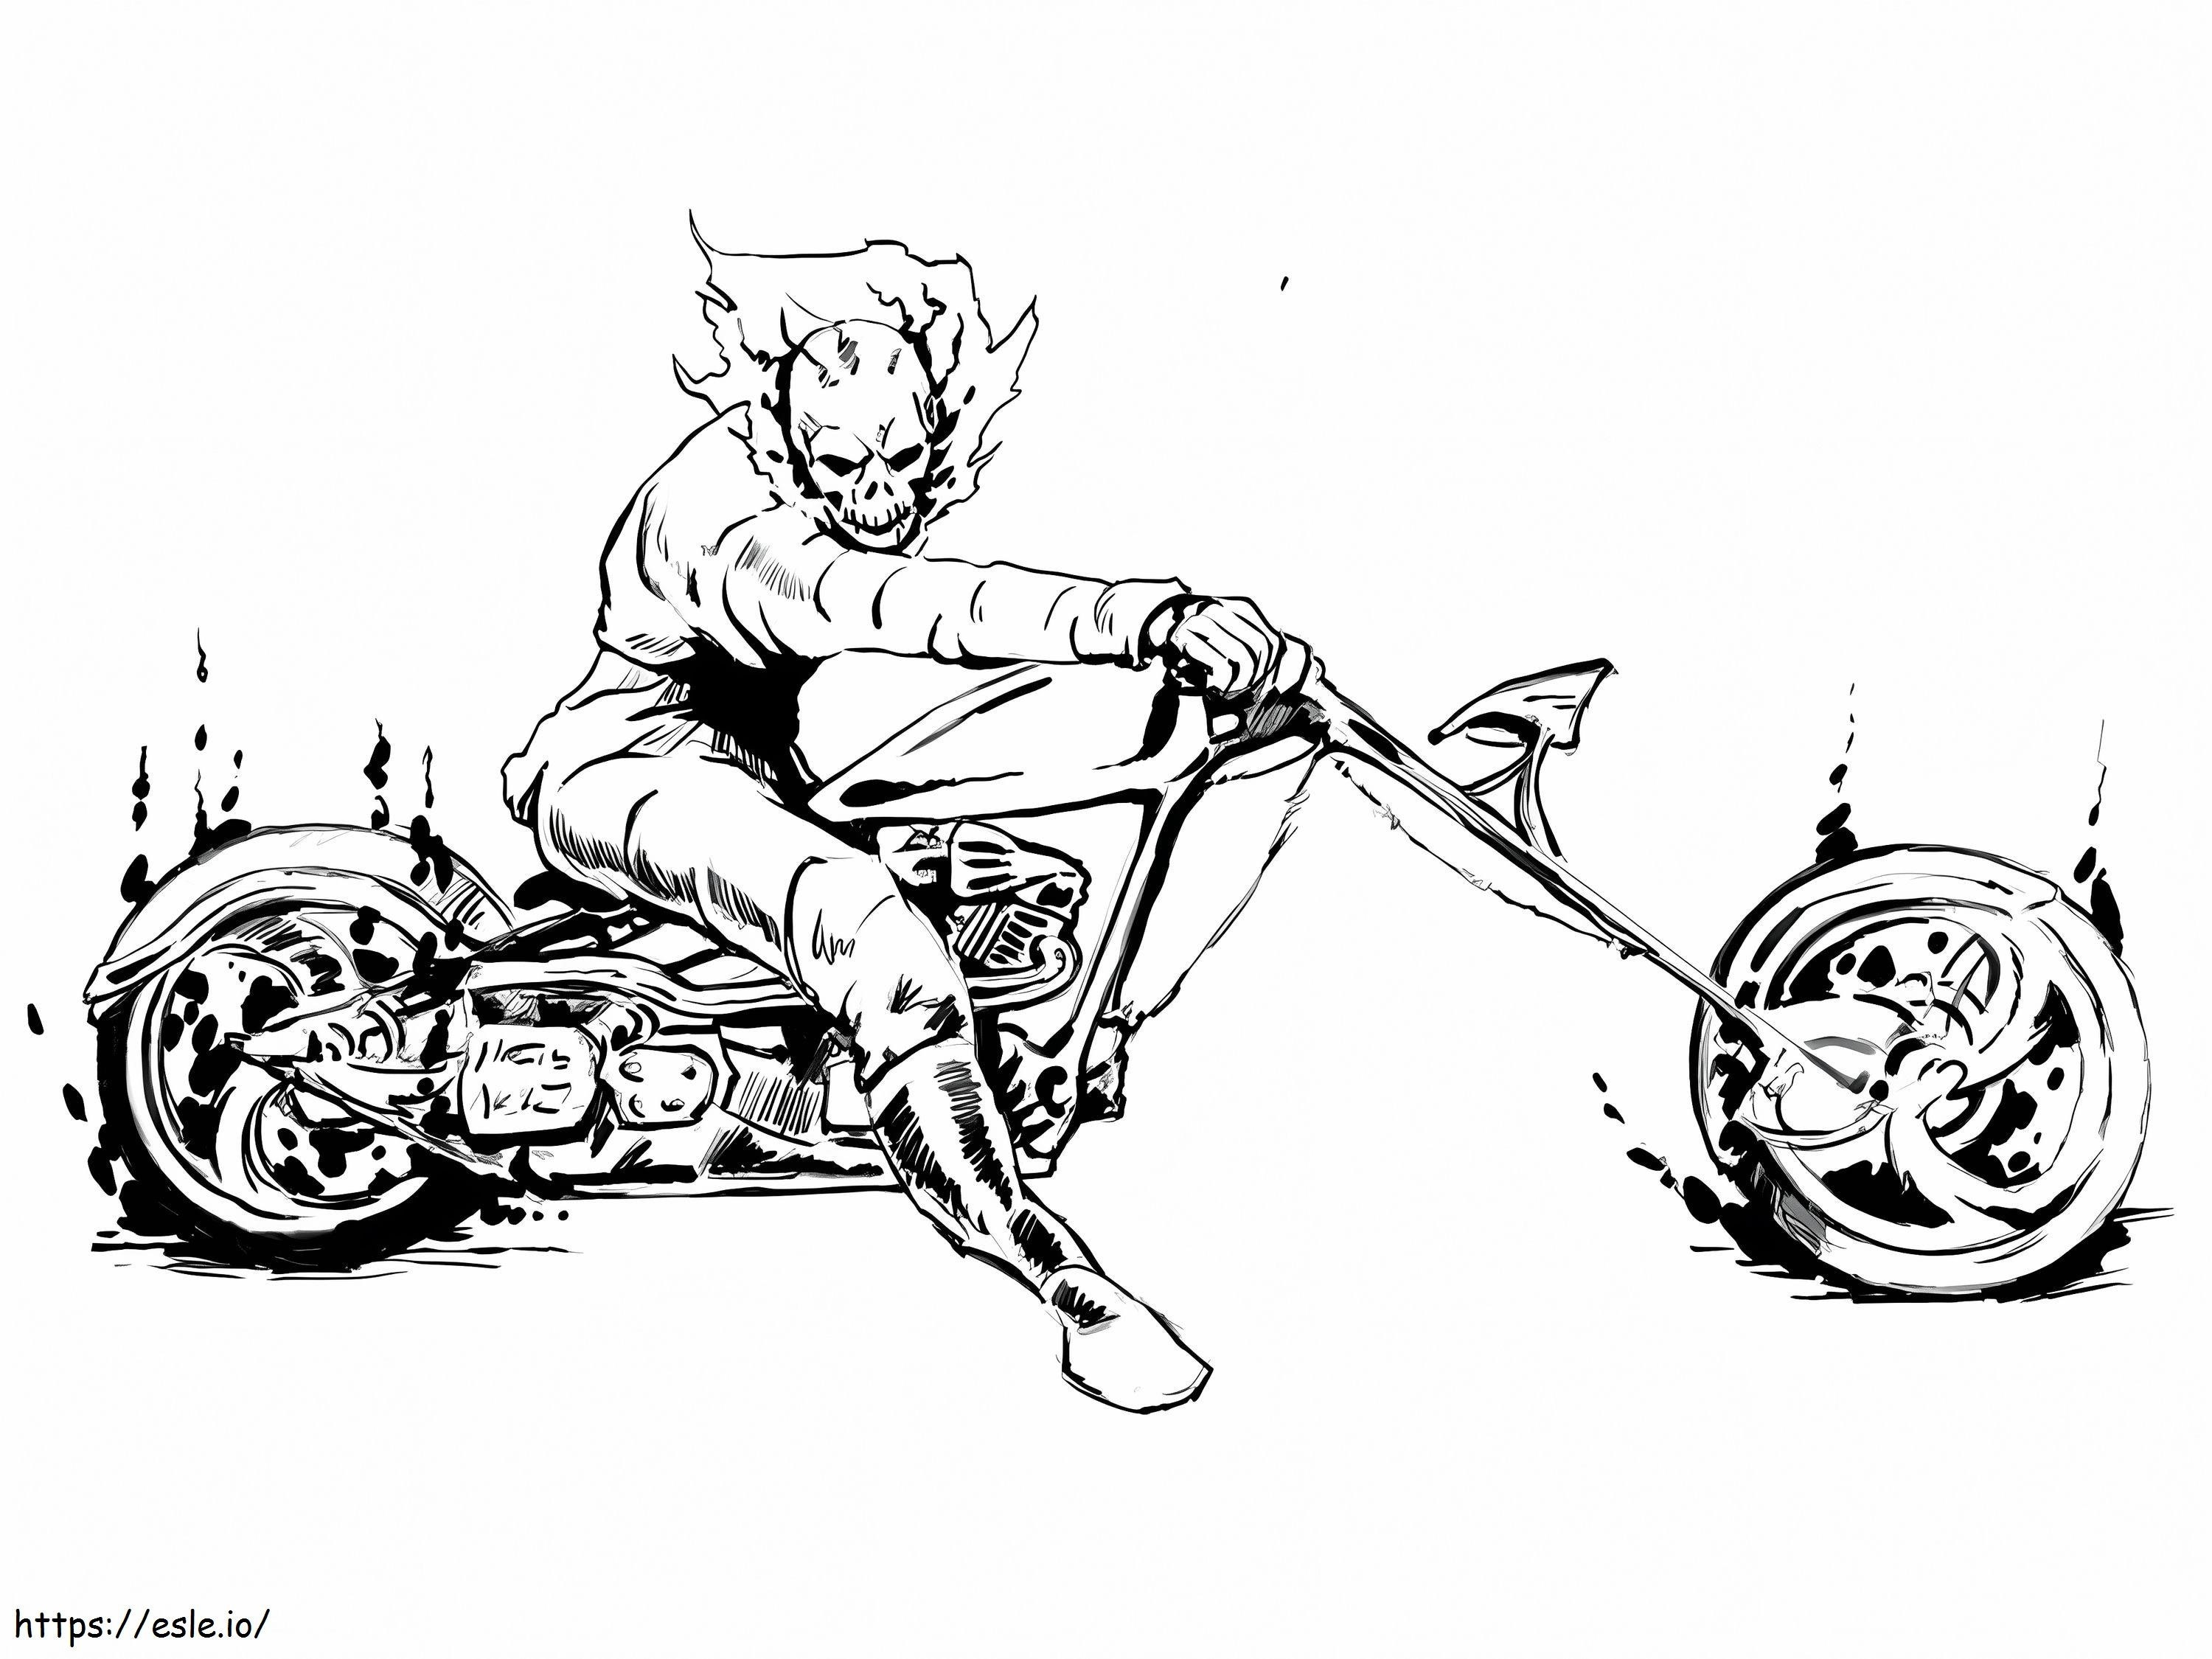 Amazing Ghost Rider coloring page